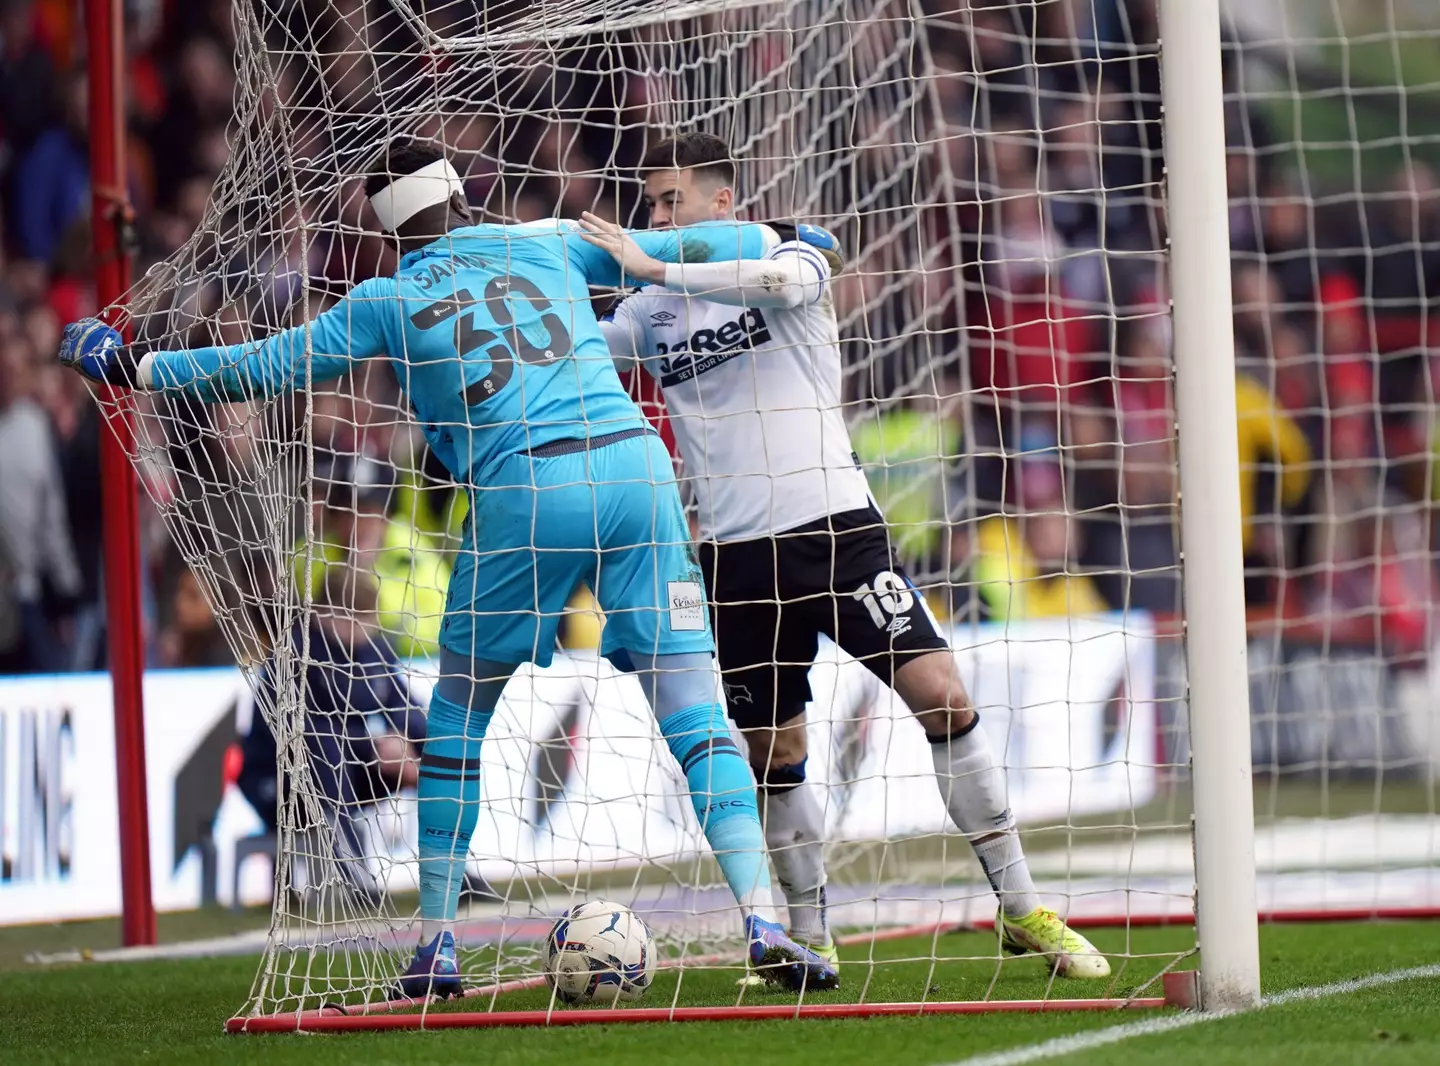 Samba clashed with Derby captain Tom Lawrence late in the game (Image: Alamy)